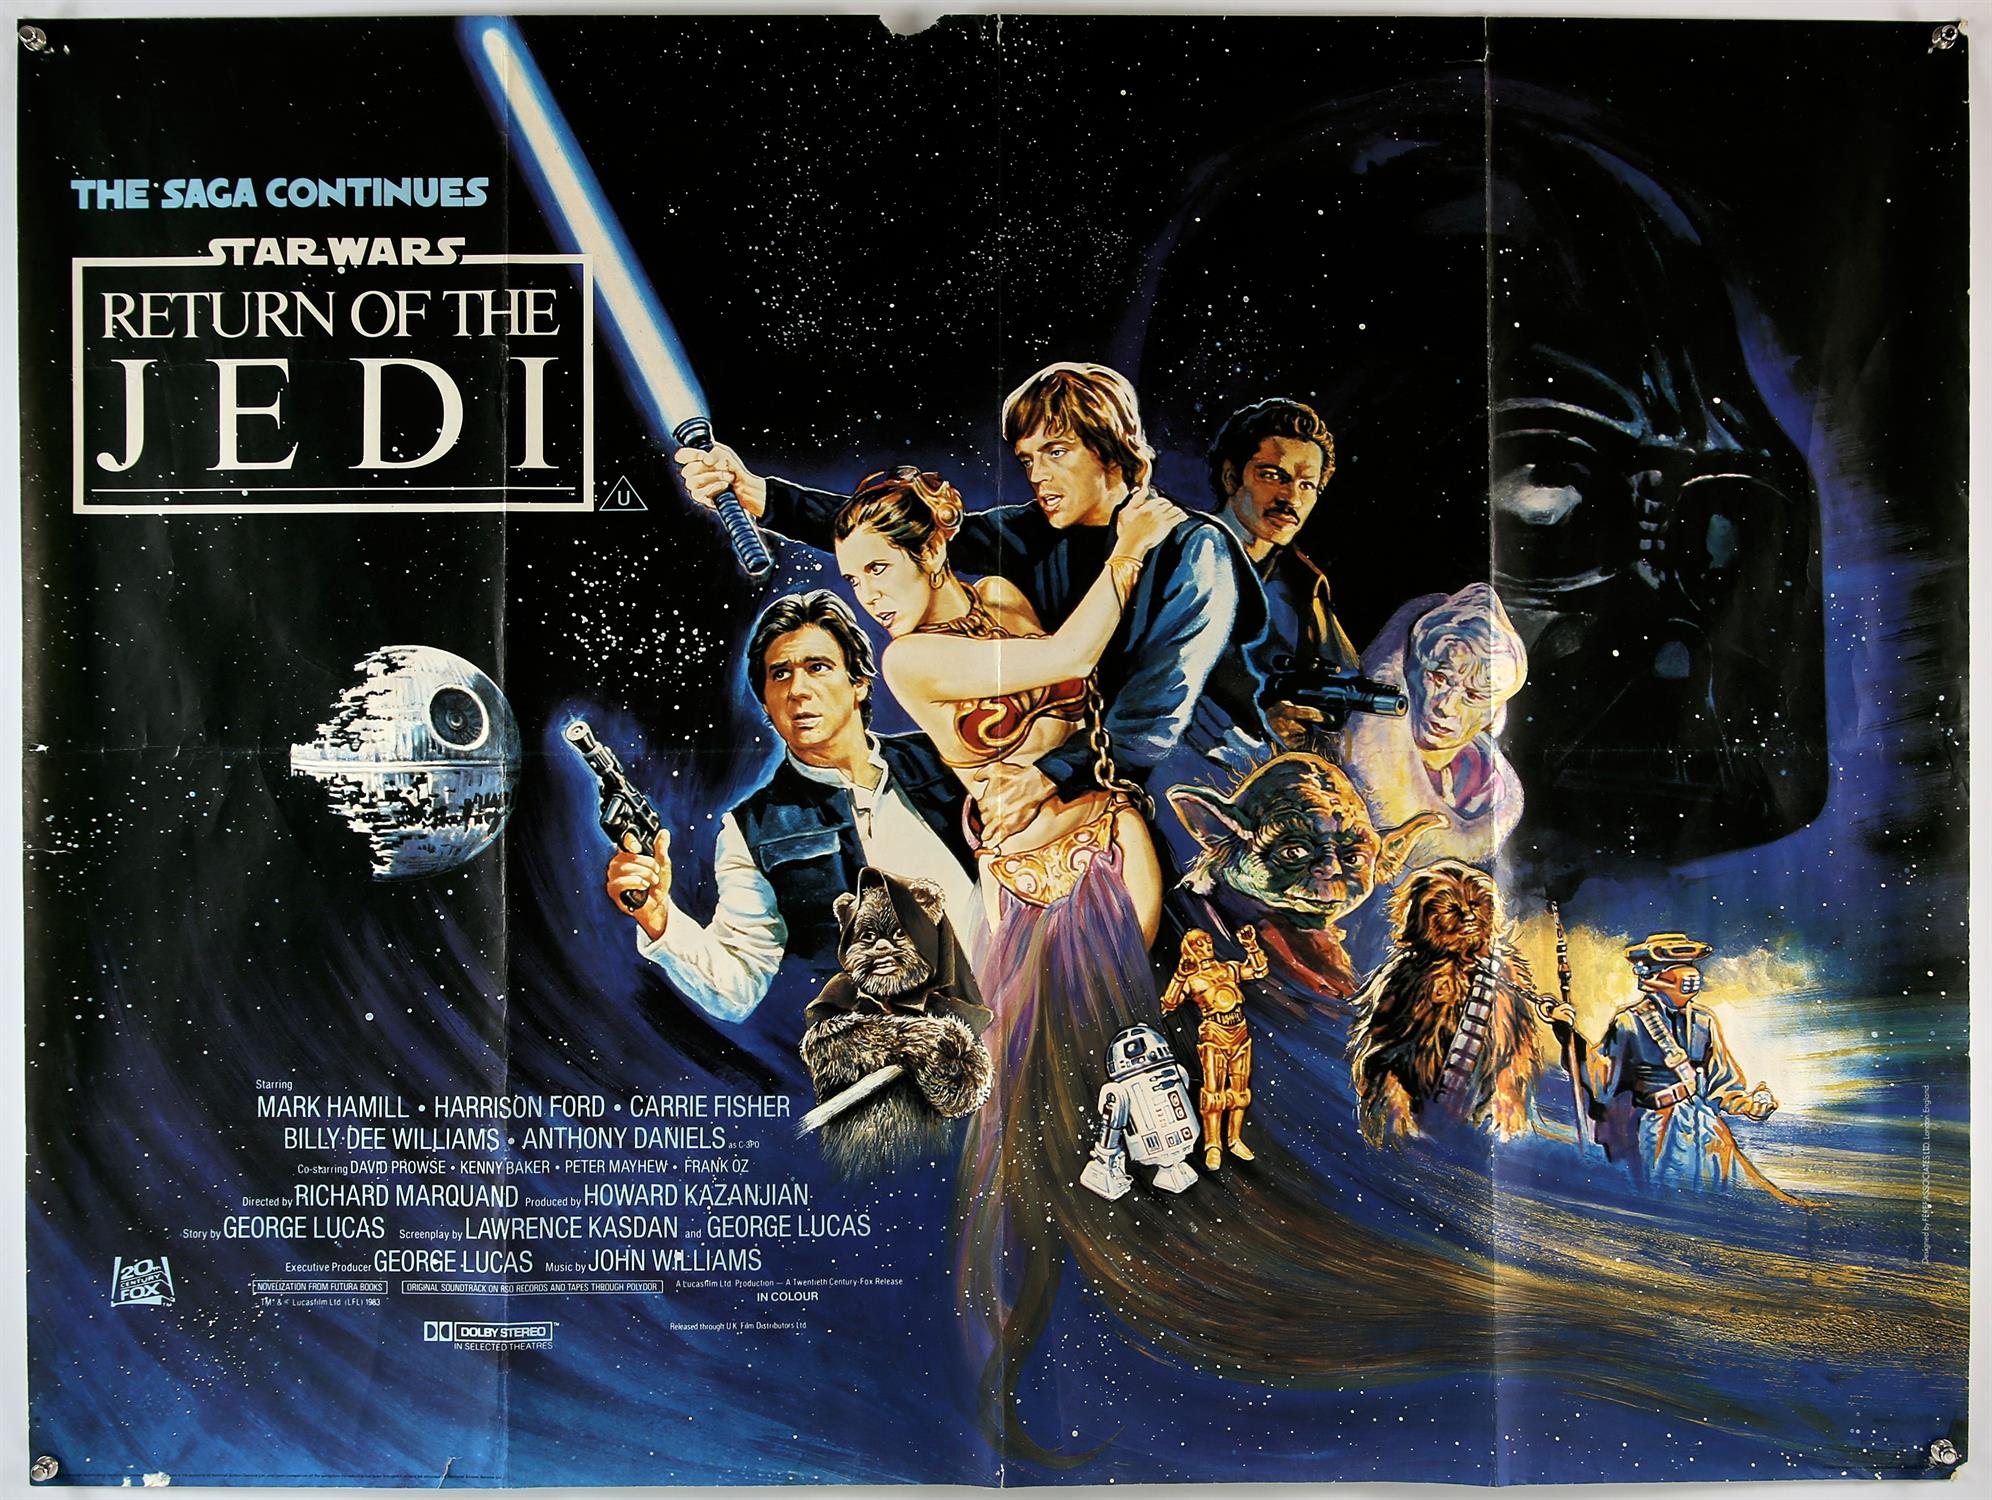 Star Wars: Return of the Jedi (1983), British Quad, was folded now rolled, 40 x 30 inches,